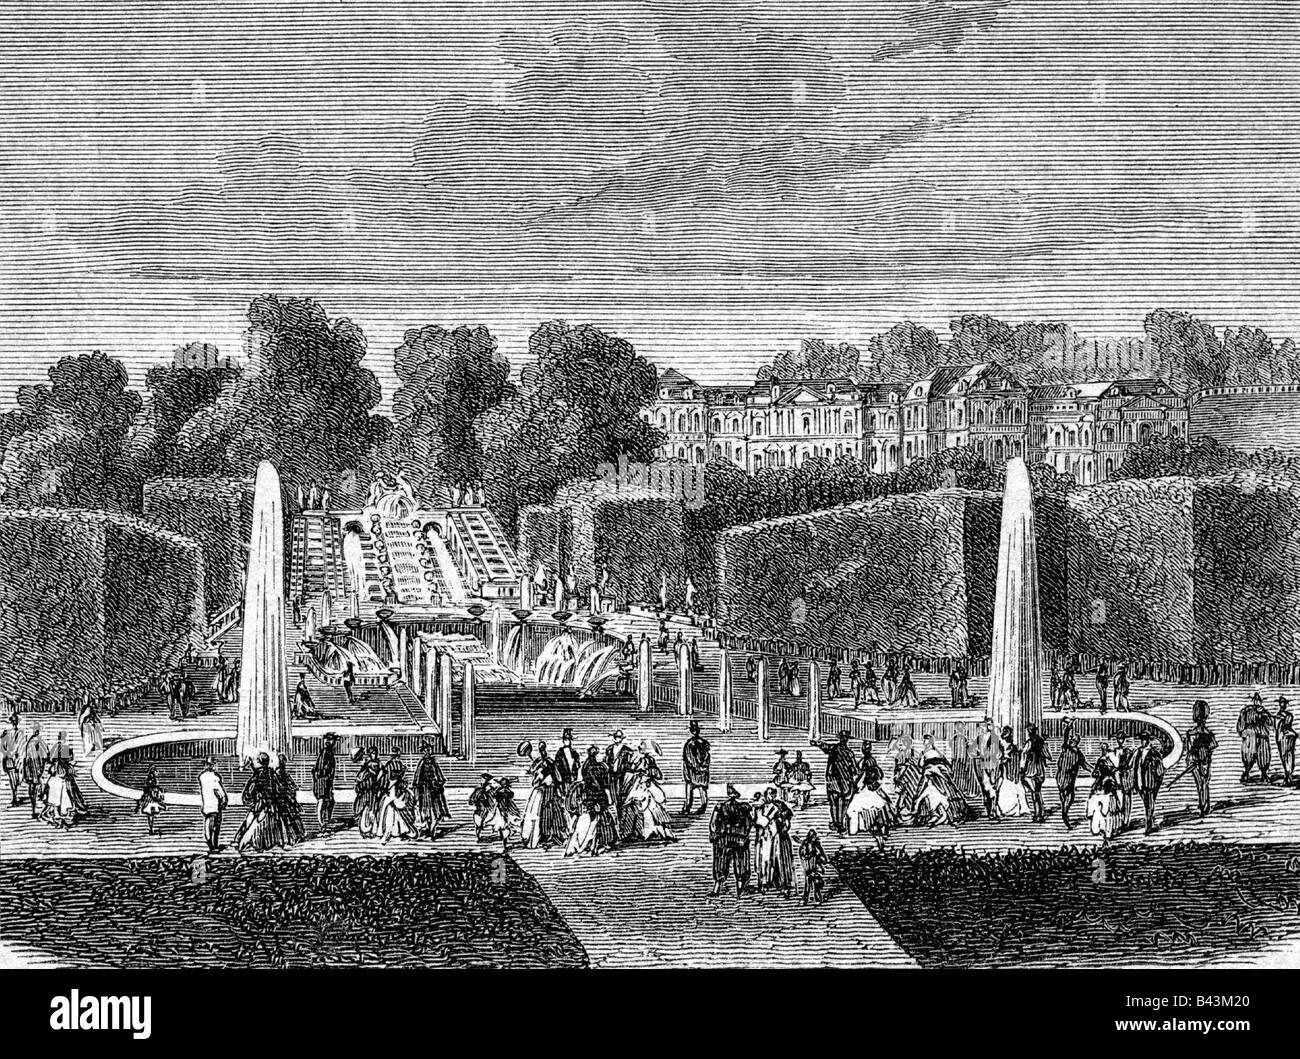 geography / travel, France, castles, Saint Cloud, exterior view, park, engraving, circa 1860, historic, historical, Europe, Franco-Prussian War 1870 / 71, place of war declaration by Emperor Napoleon III, july 1870, destroyed by French bombs 13.10.1870, park, garden, fountain, walkers, visitors, palais, castle, 19th century, people, Stock Photo